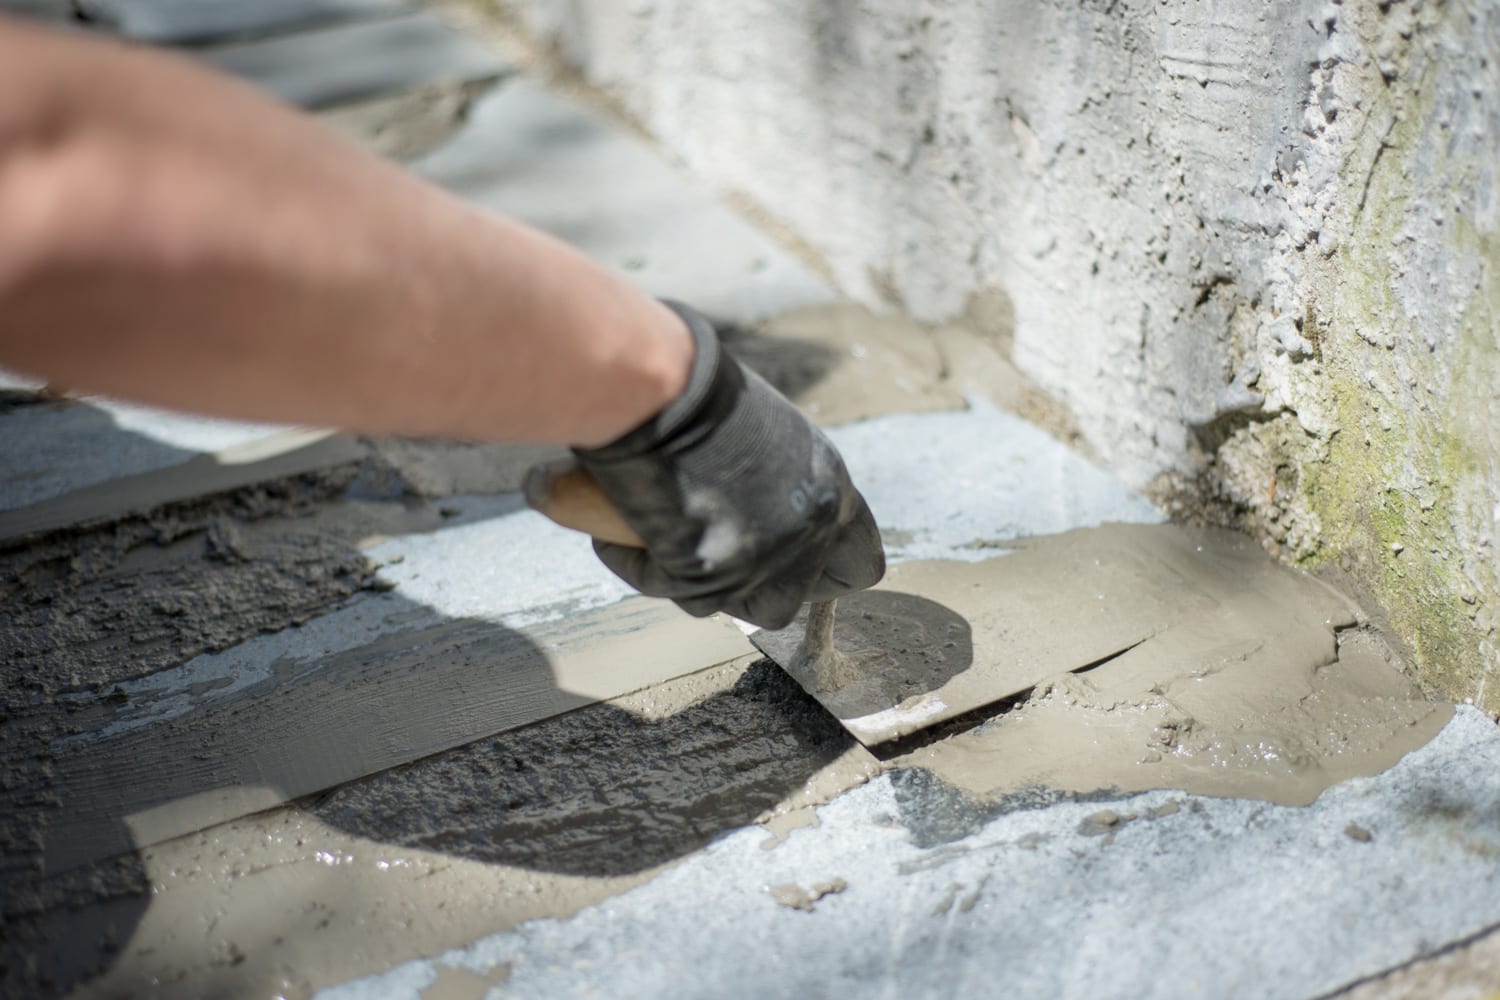 Joint filler in use, male's hand filling cracks with liquid cement on order to repair of cracks in concrete